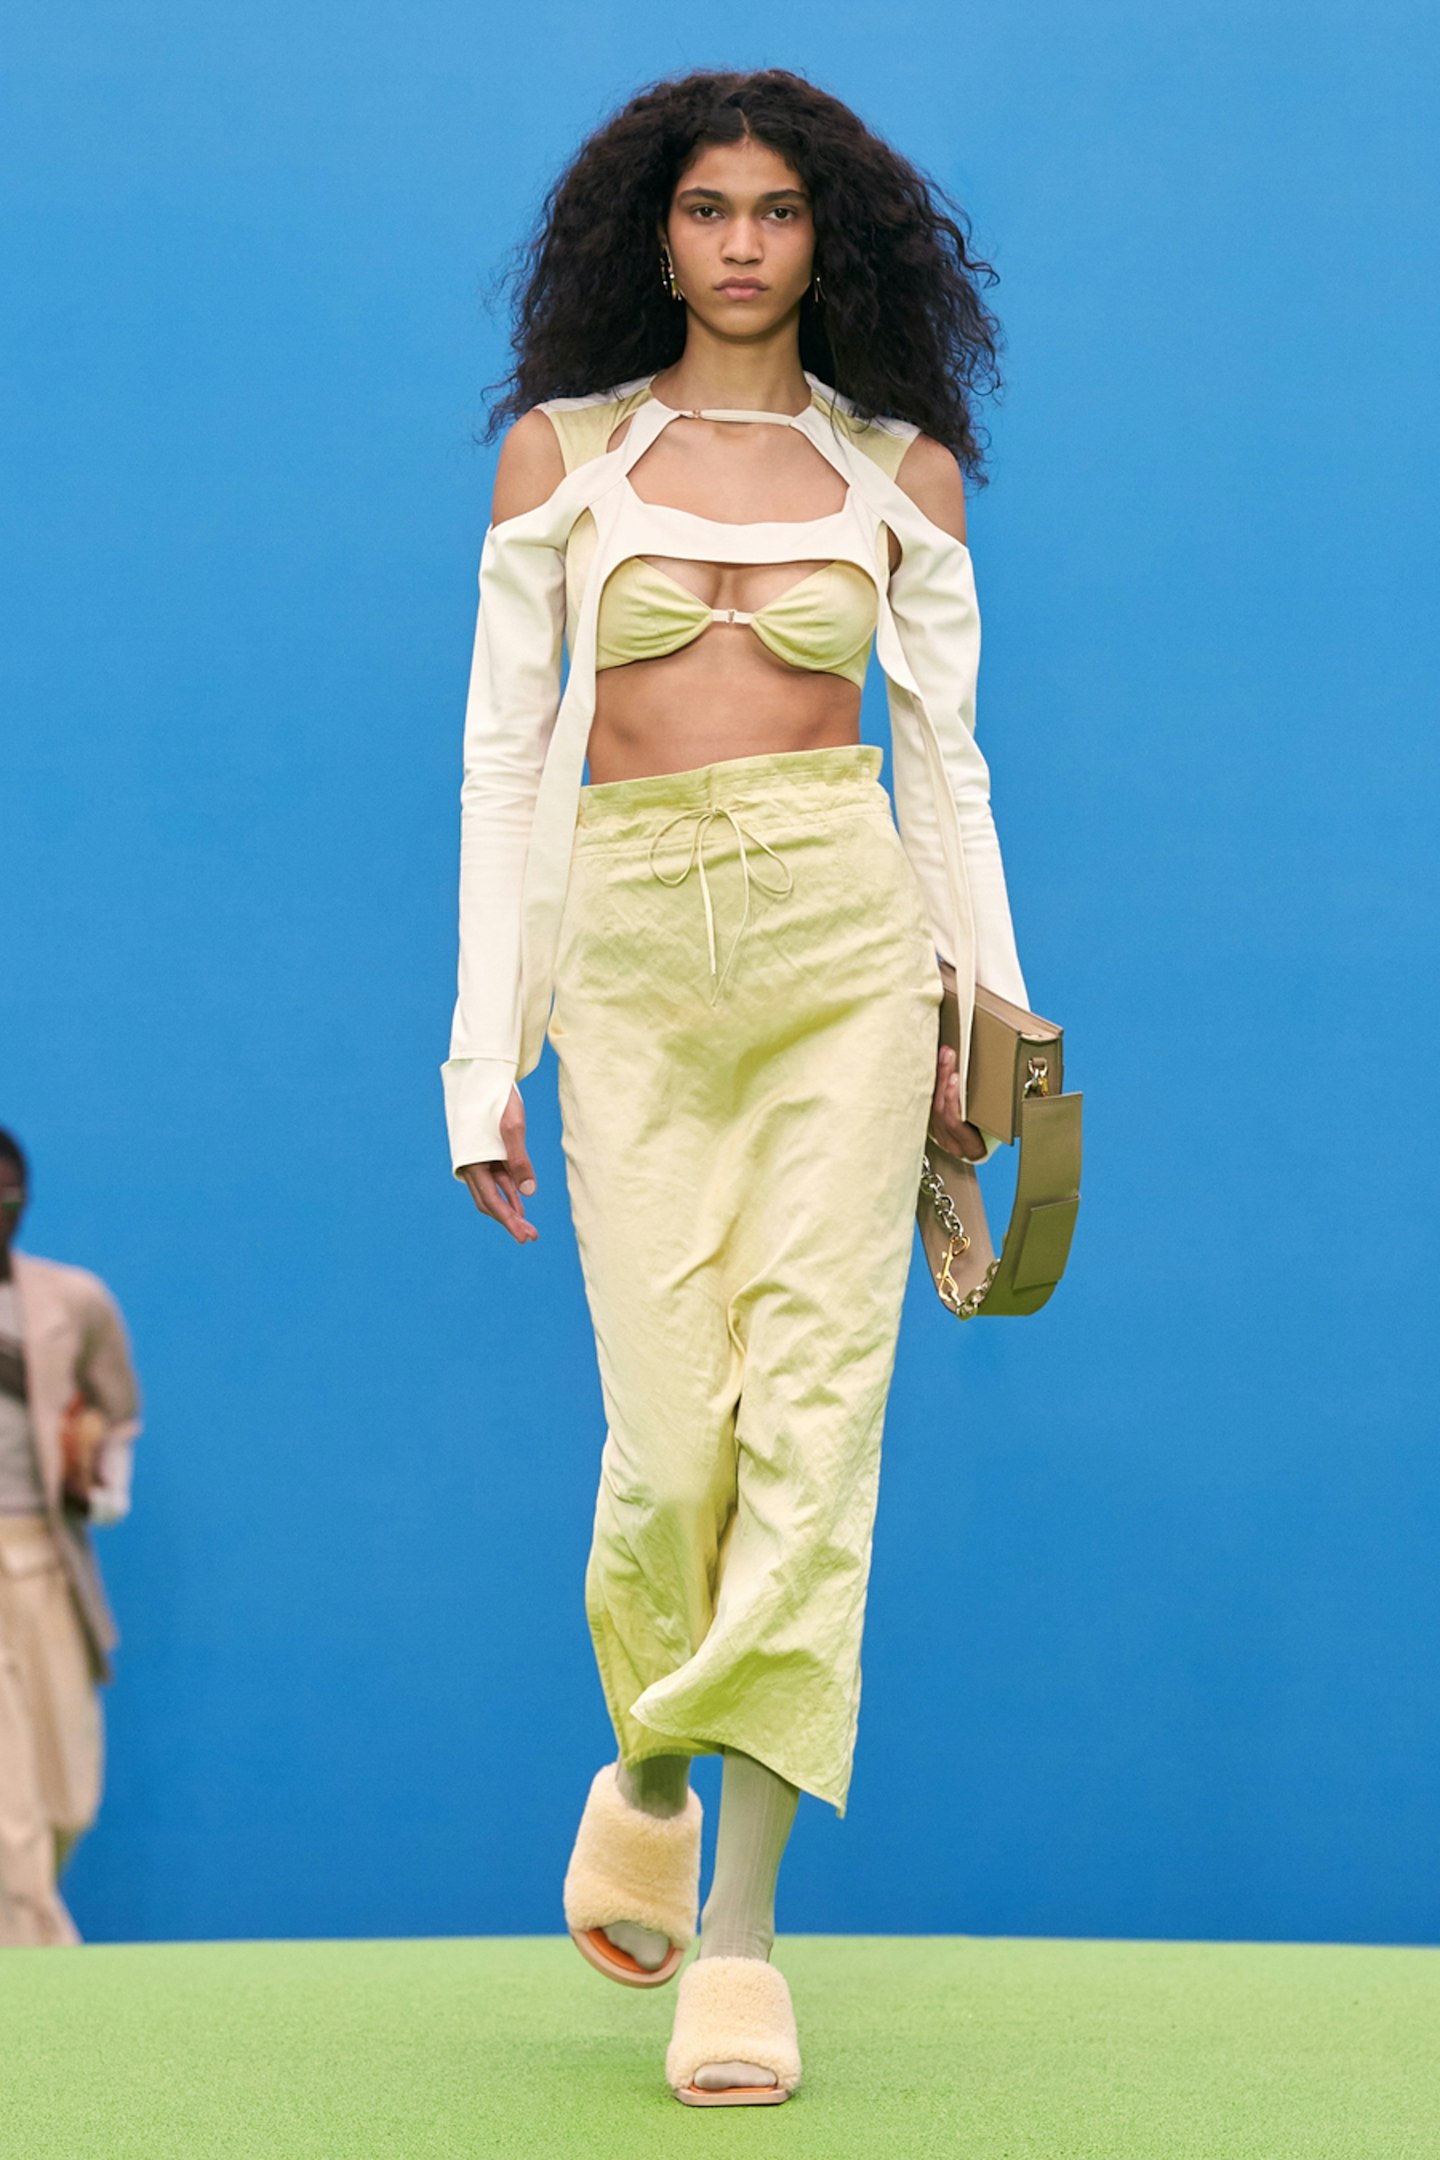 A model wearing a light green outfit at Jacquemus 